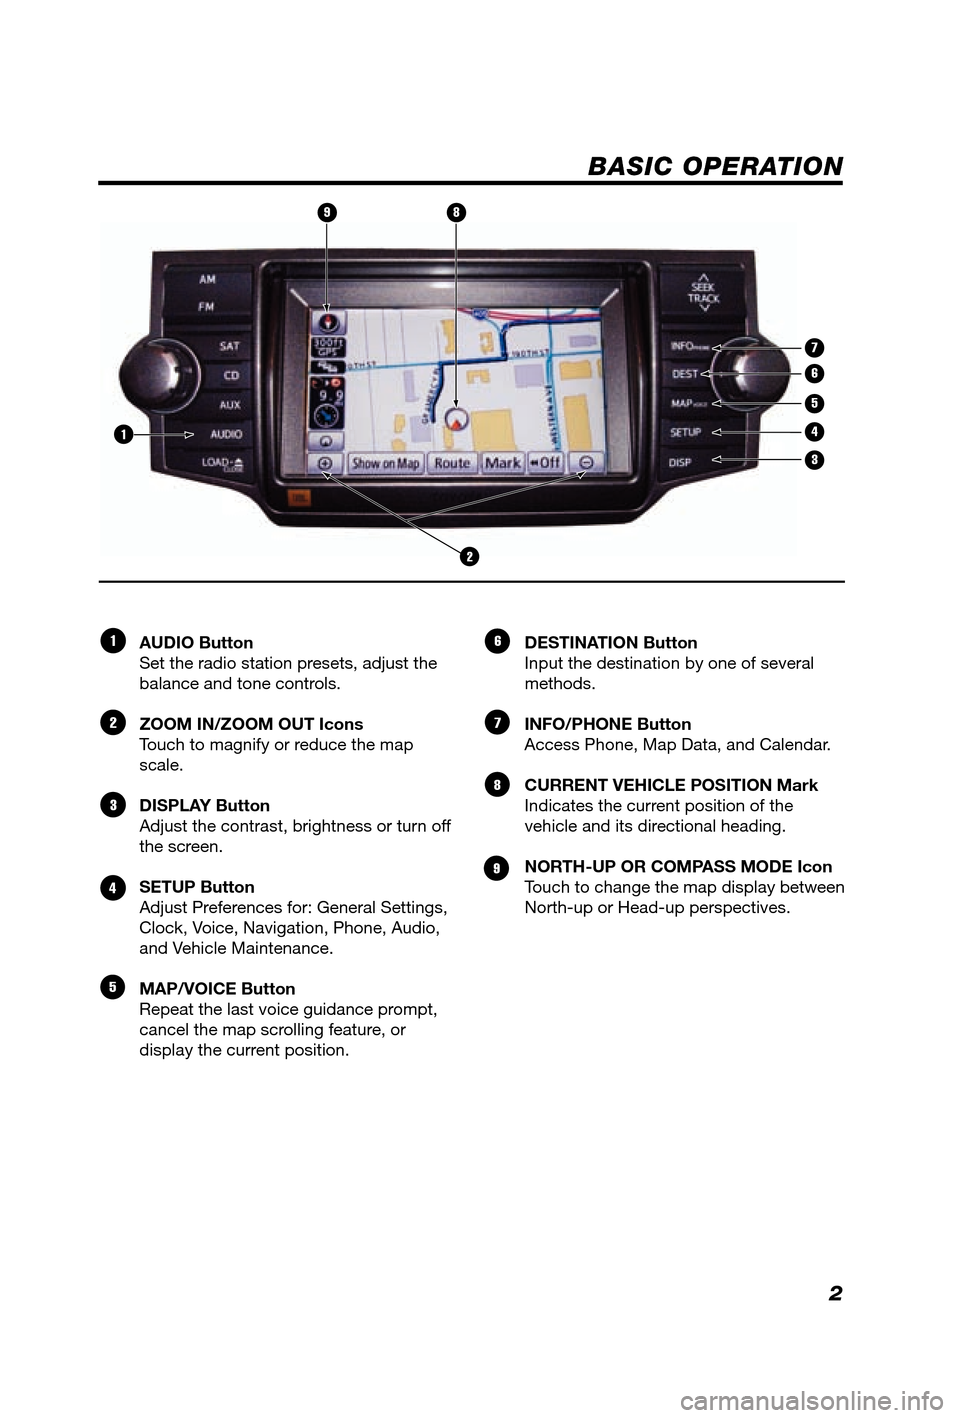 TOYOTA 4RUNNER 2012 N280 / 5.G Navigation Manual 2
BASIC OPERATION
AUDIO Button
Set the radio station presets, adjust the 
balance and tone controls. 
ZOOM IN/ZOOM OUT Icons
Touch to magnify or reduce the map 
scale. 
DISPLAY Button
Adjust the contr